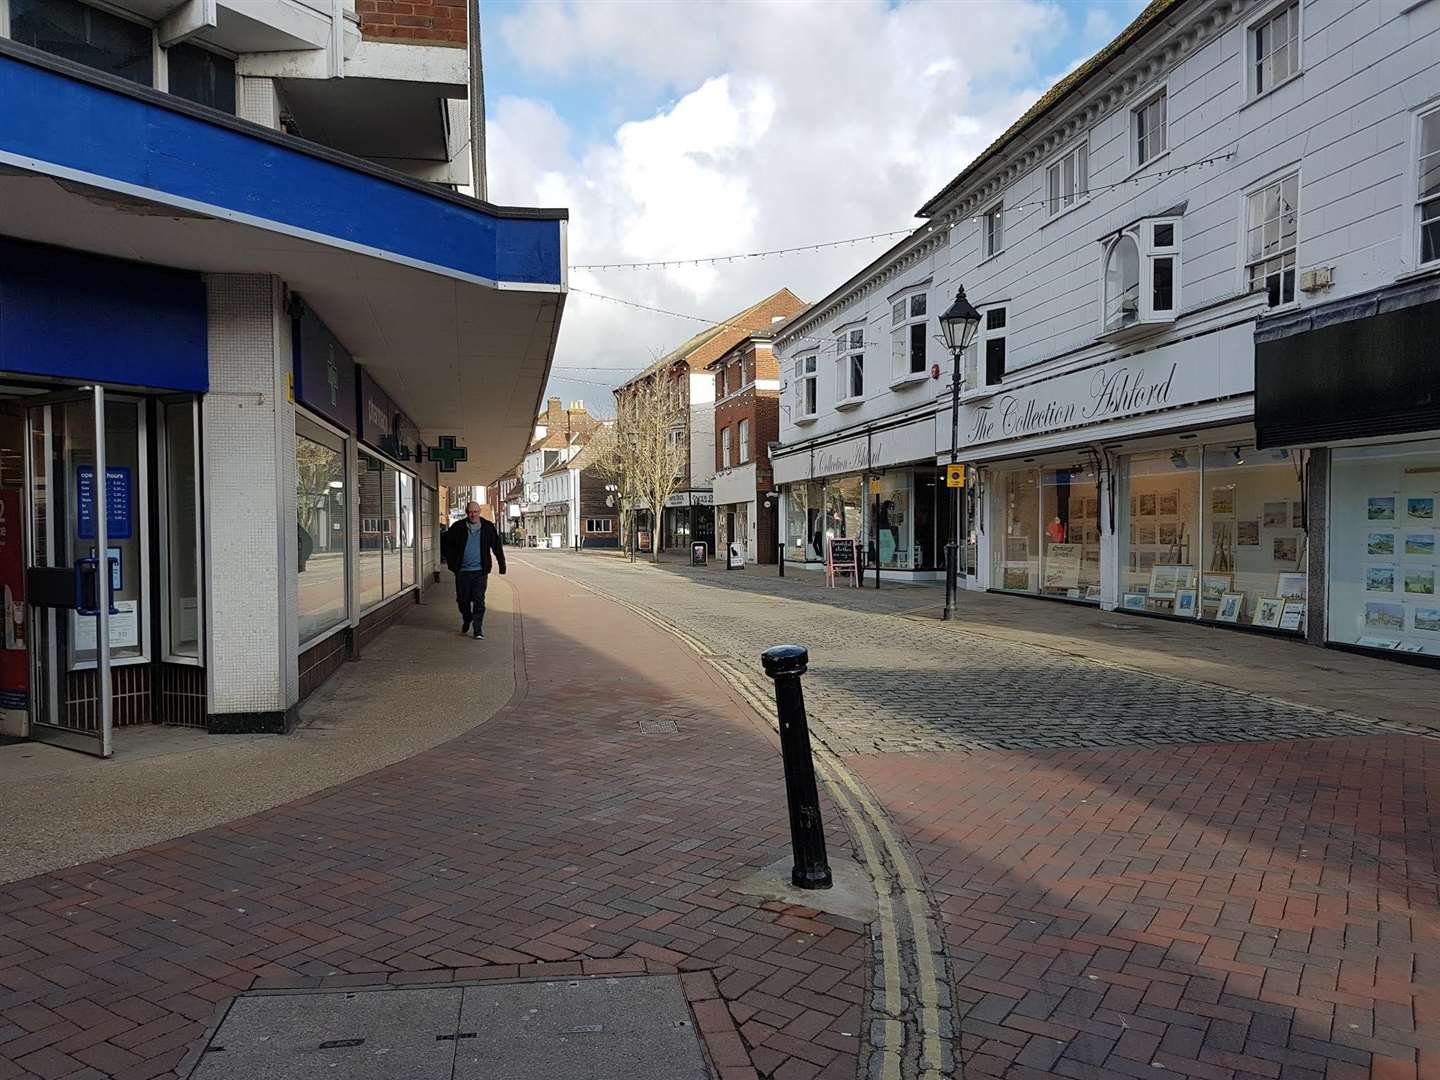 The attack happened in North Street, Ashford